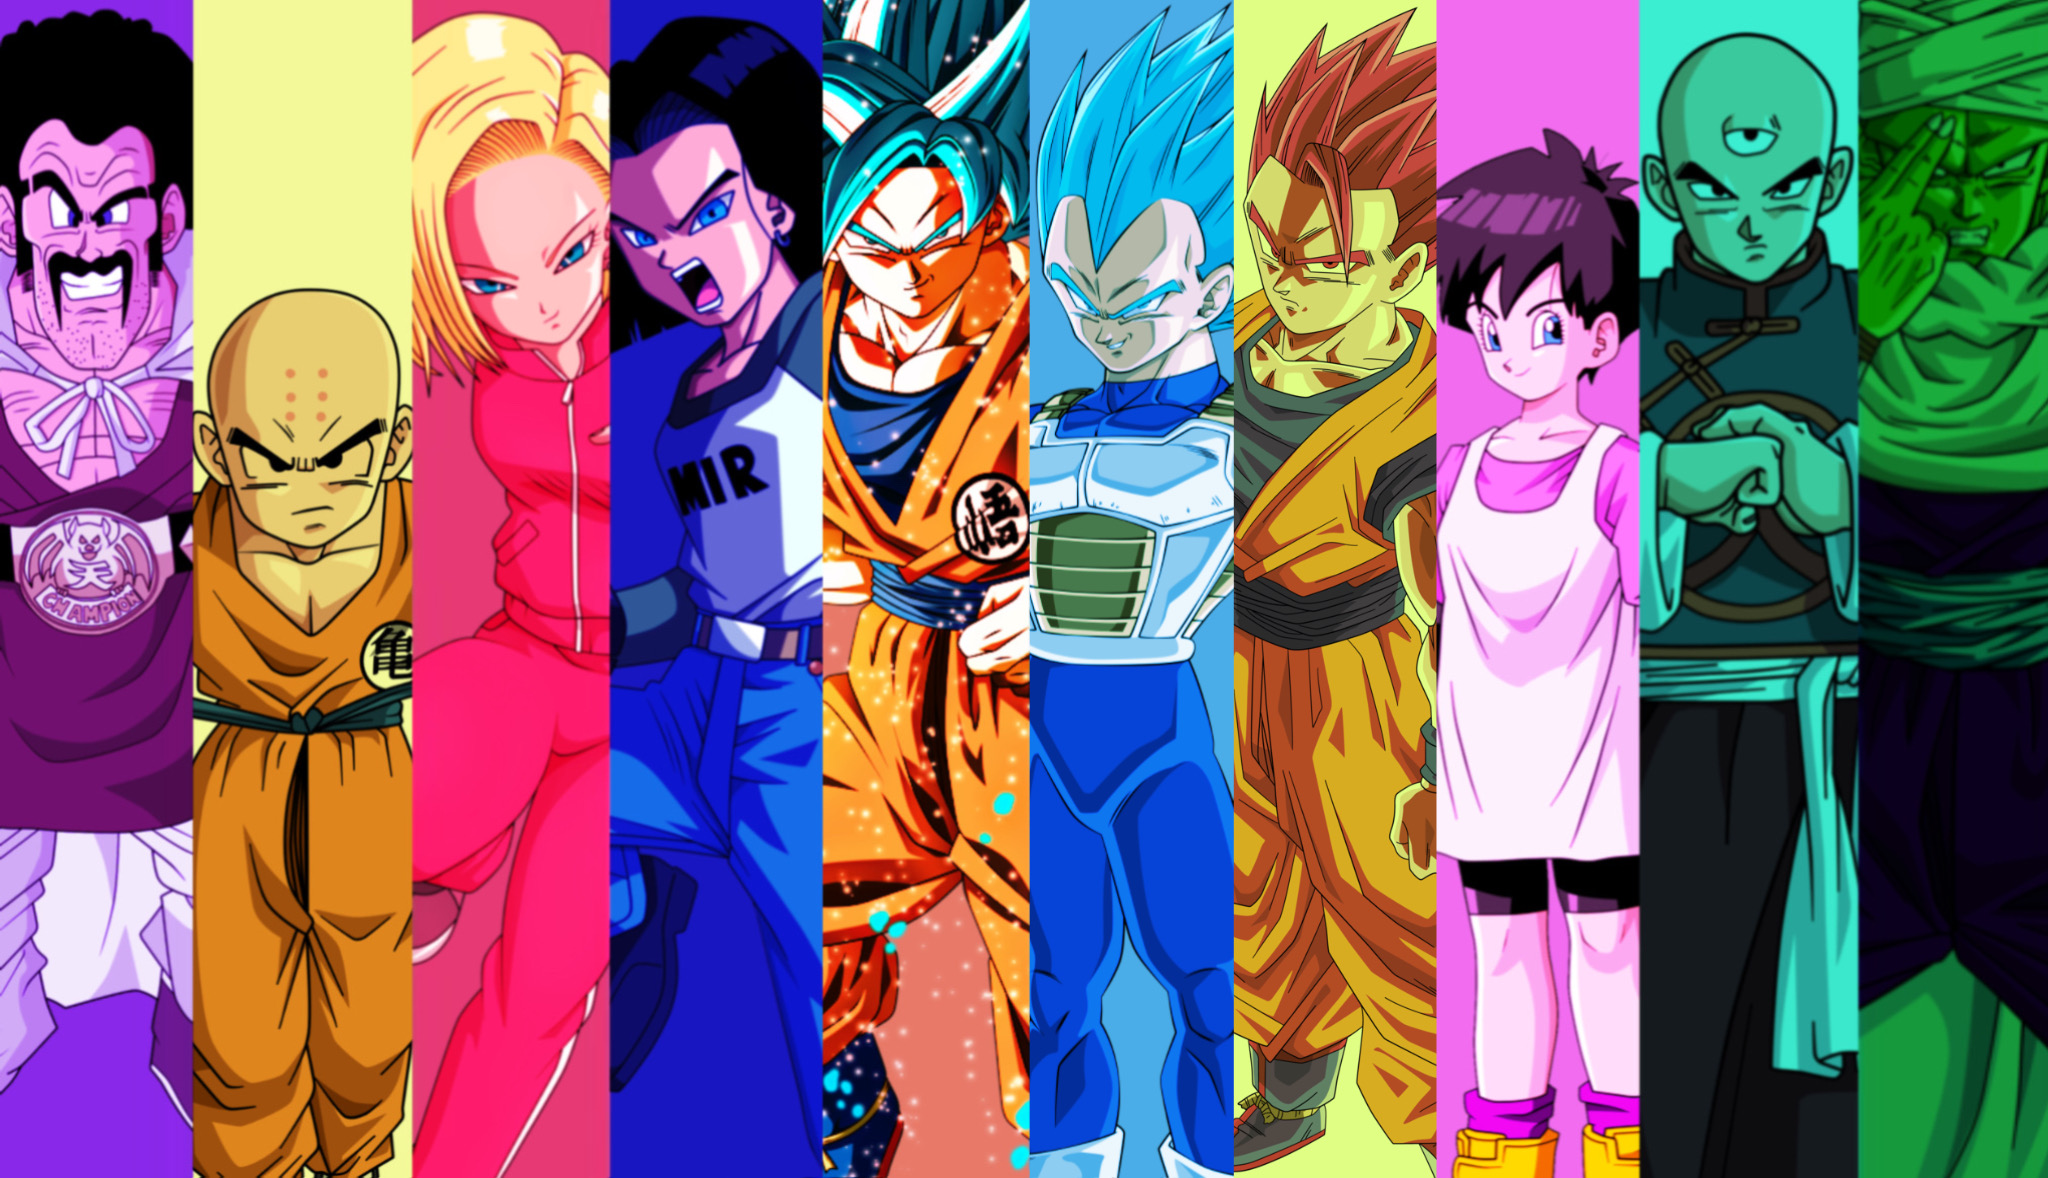 Top 10 Greatest Dragon Ball Z Characters by HeroCollector16 on DeviantArt